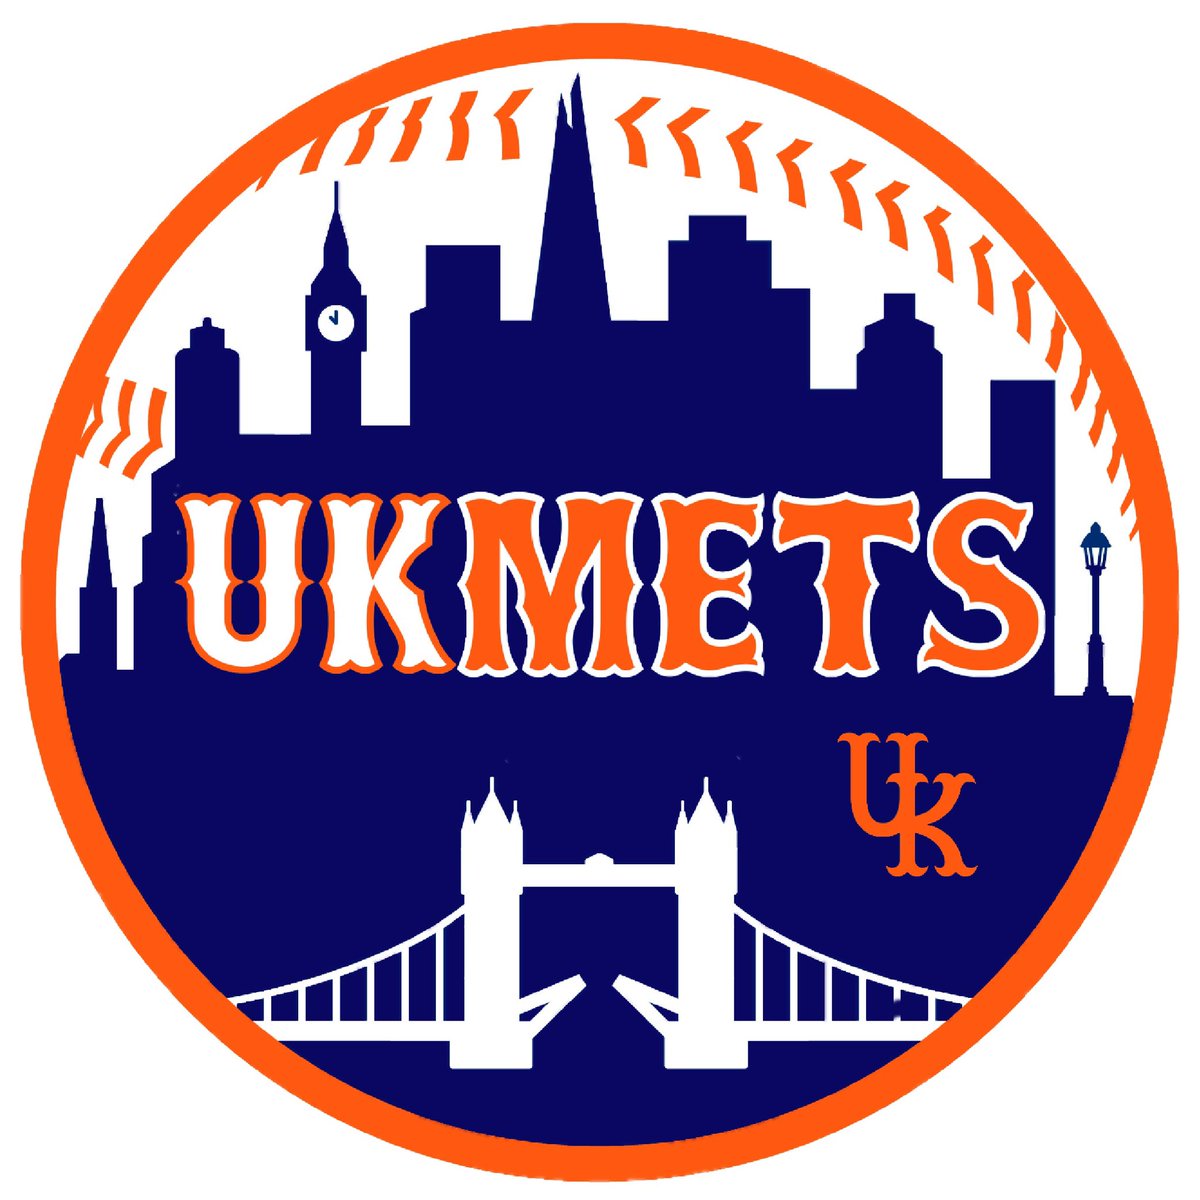 With #LondonSeries fast approaching give us a retweet and follow… Representing @Mets and @MLB in Great Britain and Ireland since 1985.. #LGM